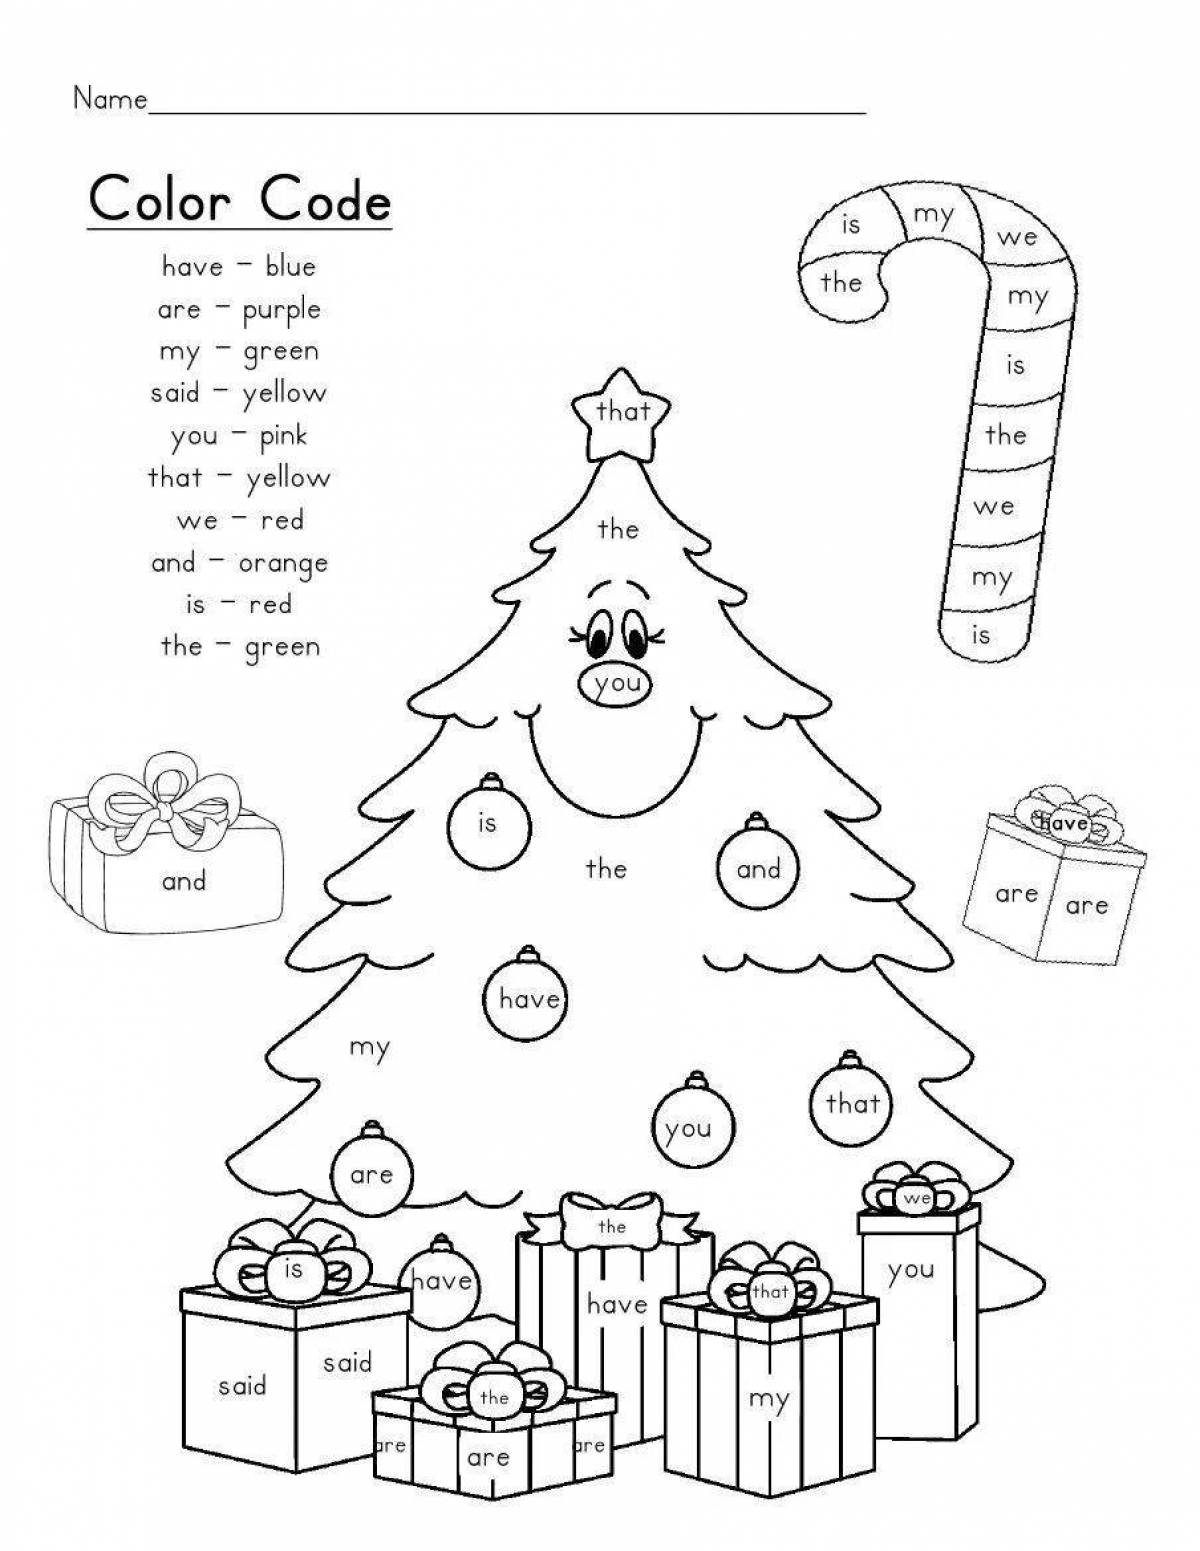 Sublime christmas coloring book